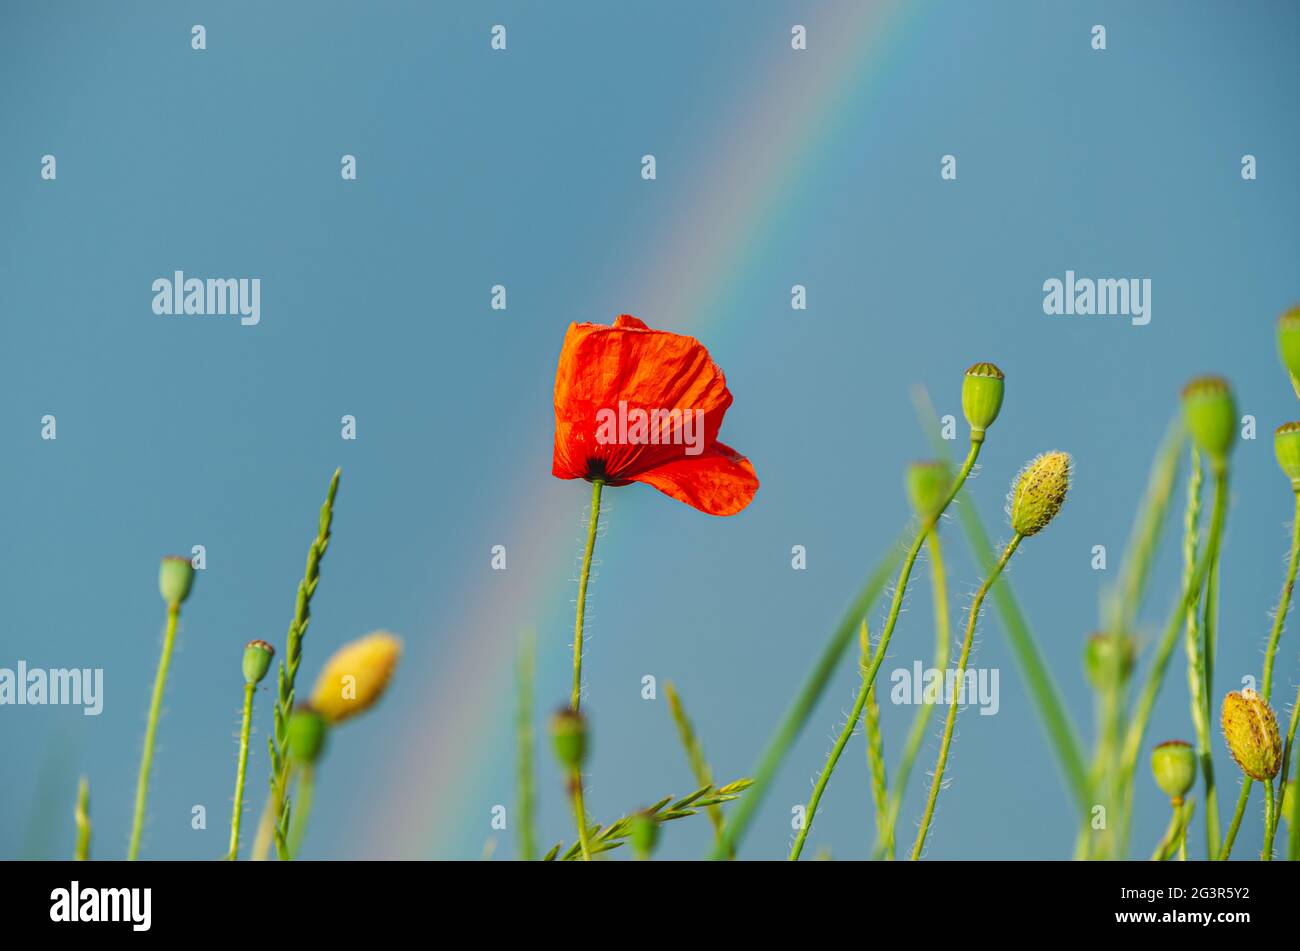 Bright scenery of red poppy flower lit by golden evening light, during summer rain, with rain drops on petals, partial rainbow and blue sky backround Stock Photo